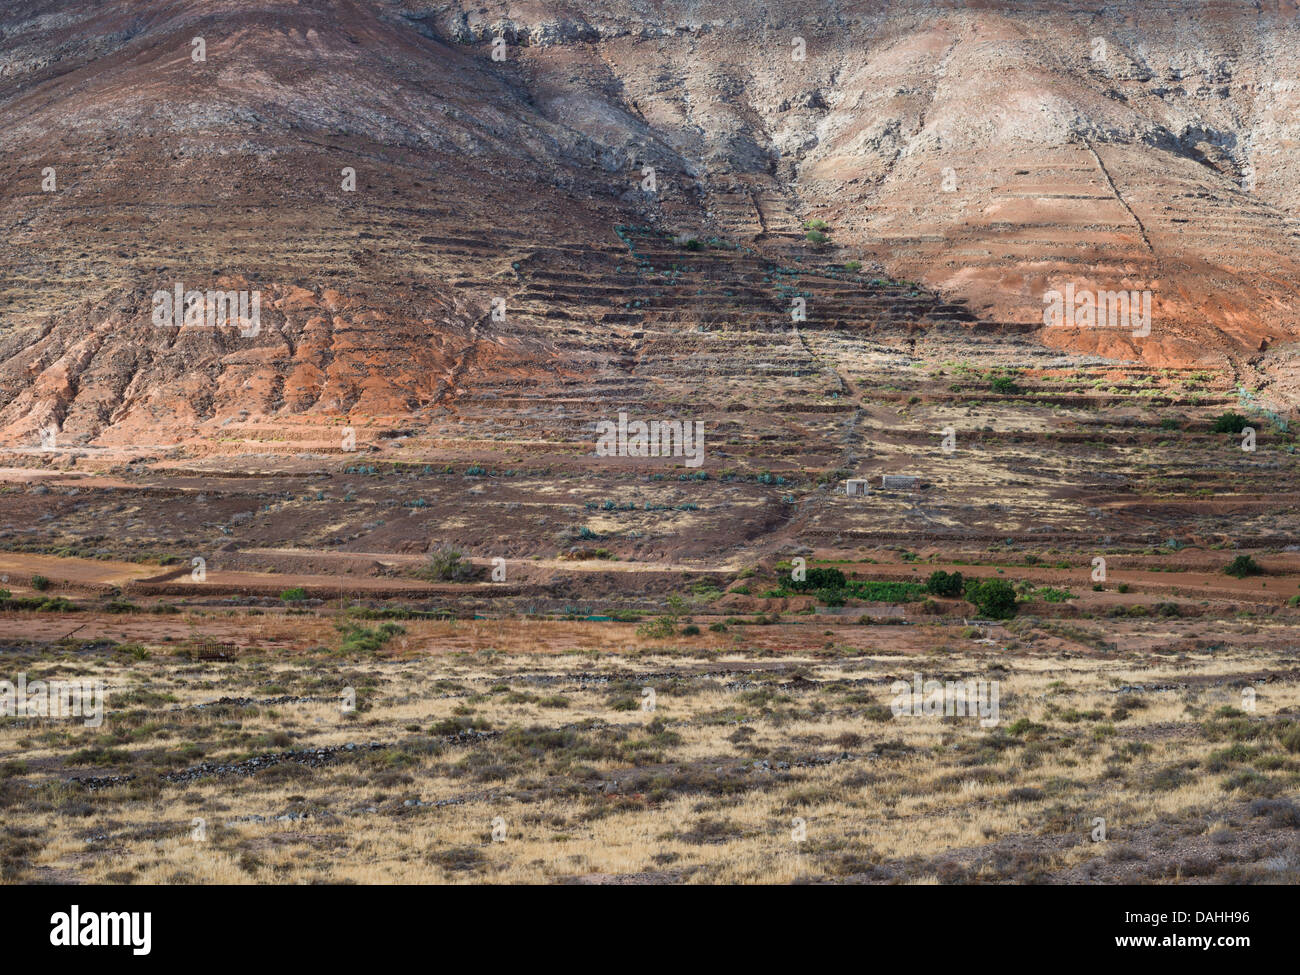 Agricultural terraces and debris fans at Vallebron, Fuerteventura, Canary Islands, Spain Stock Photo